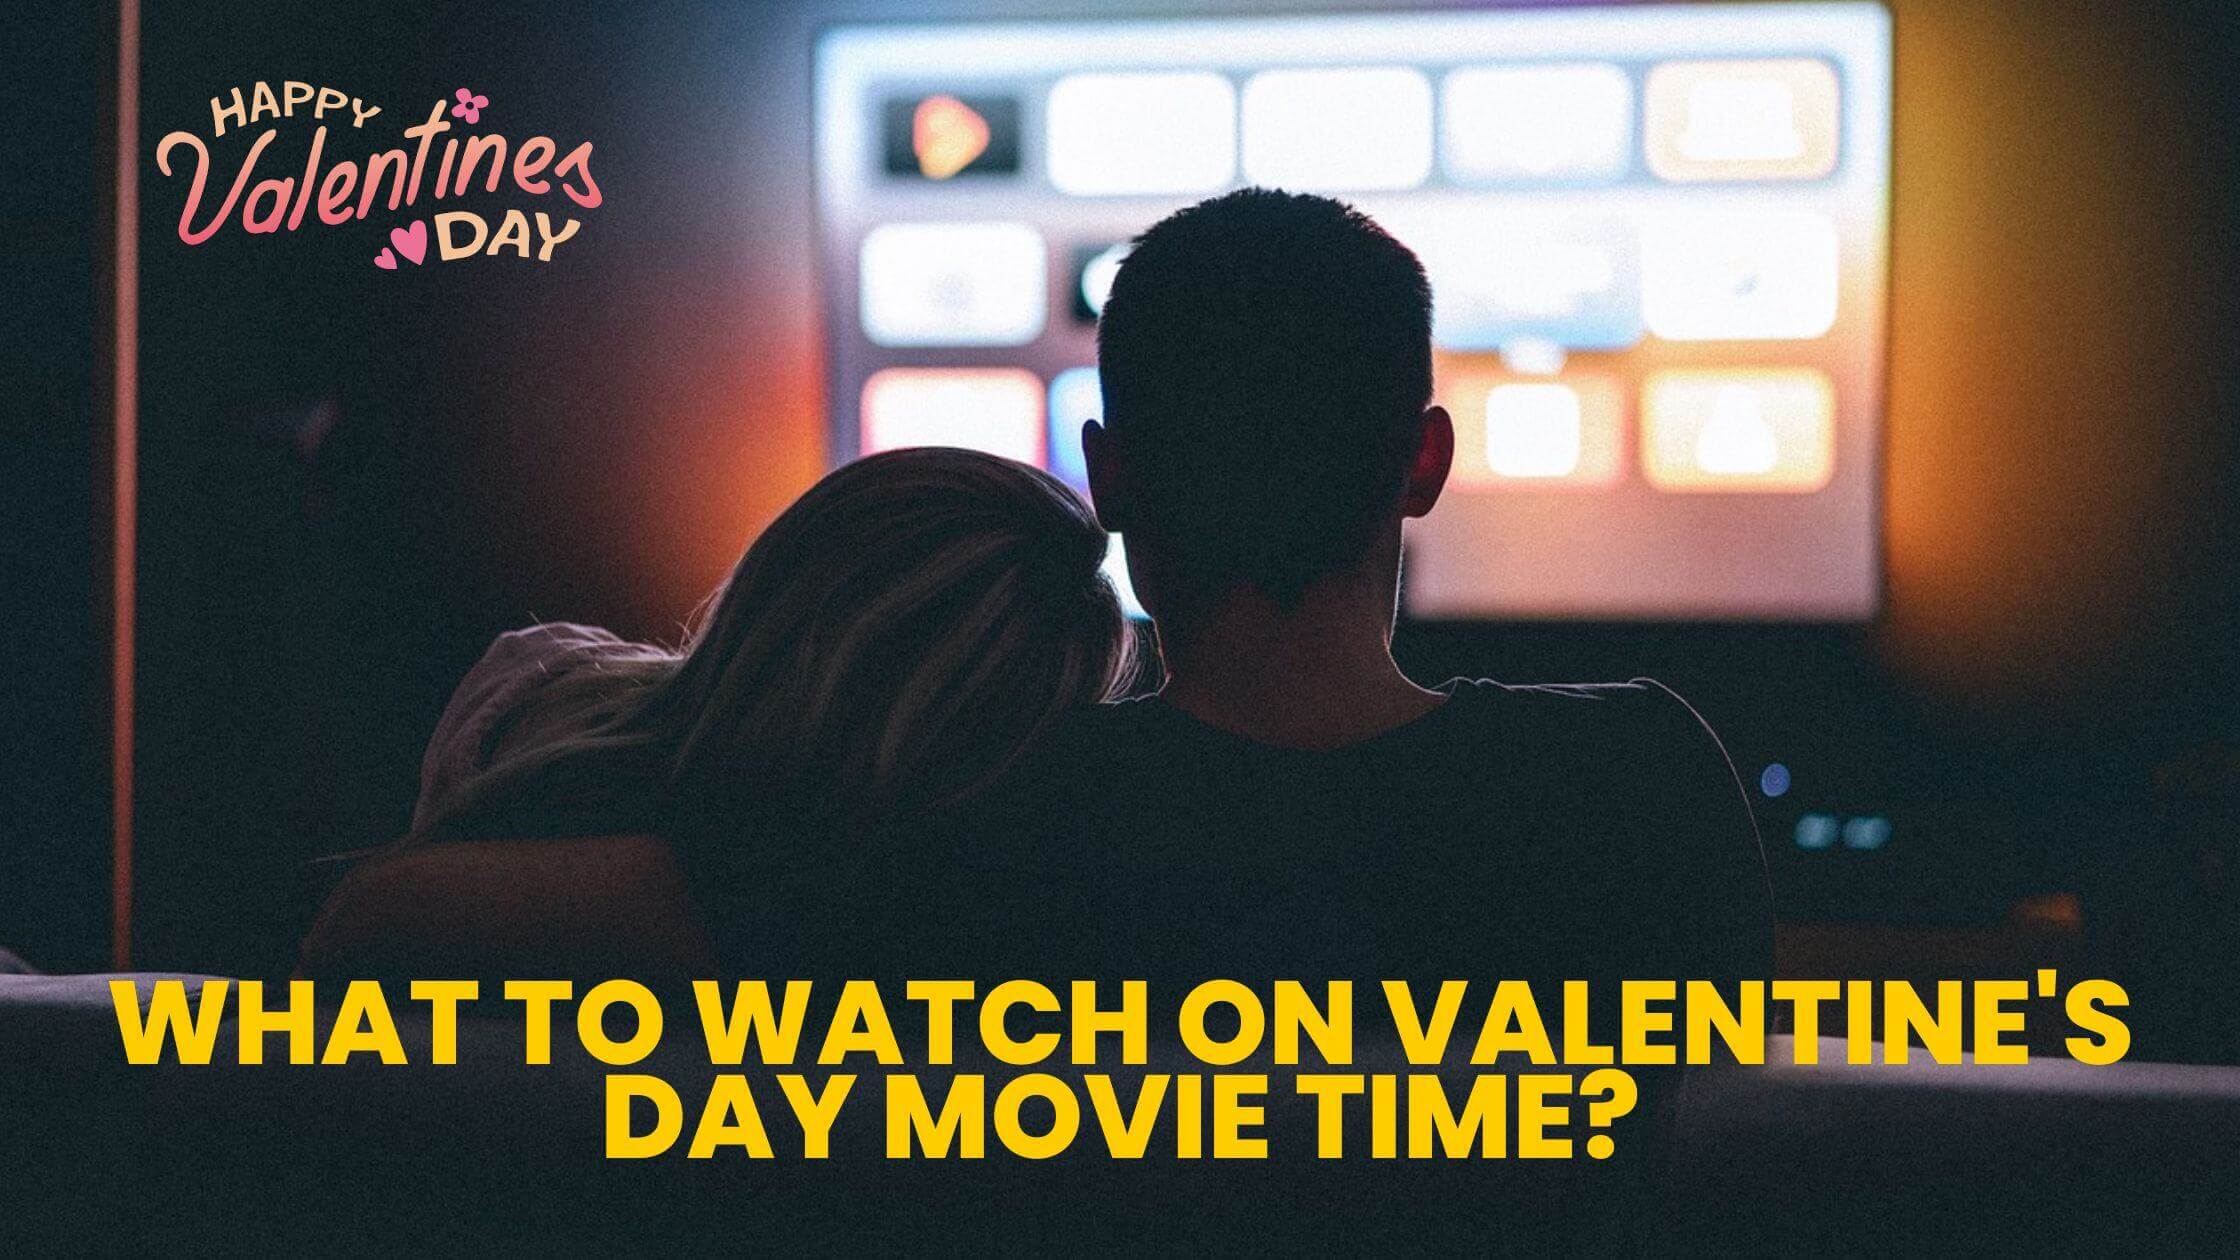 What to Watch Special on Valentine’s Day Movie Time?